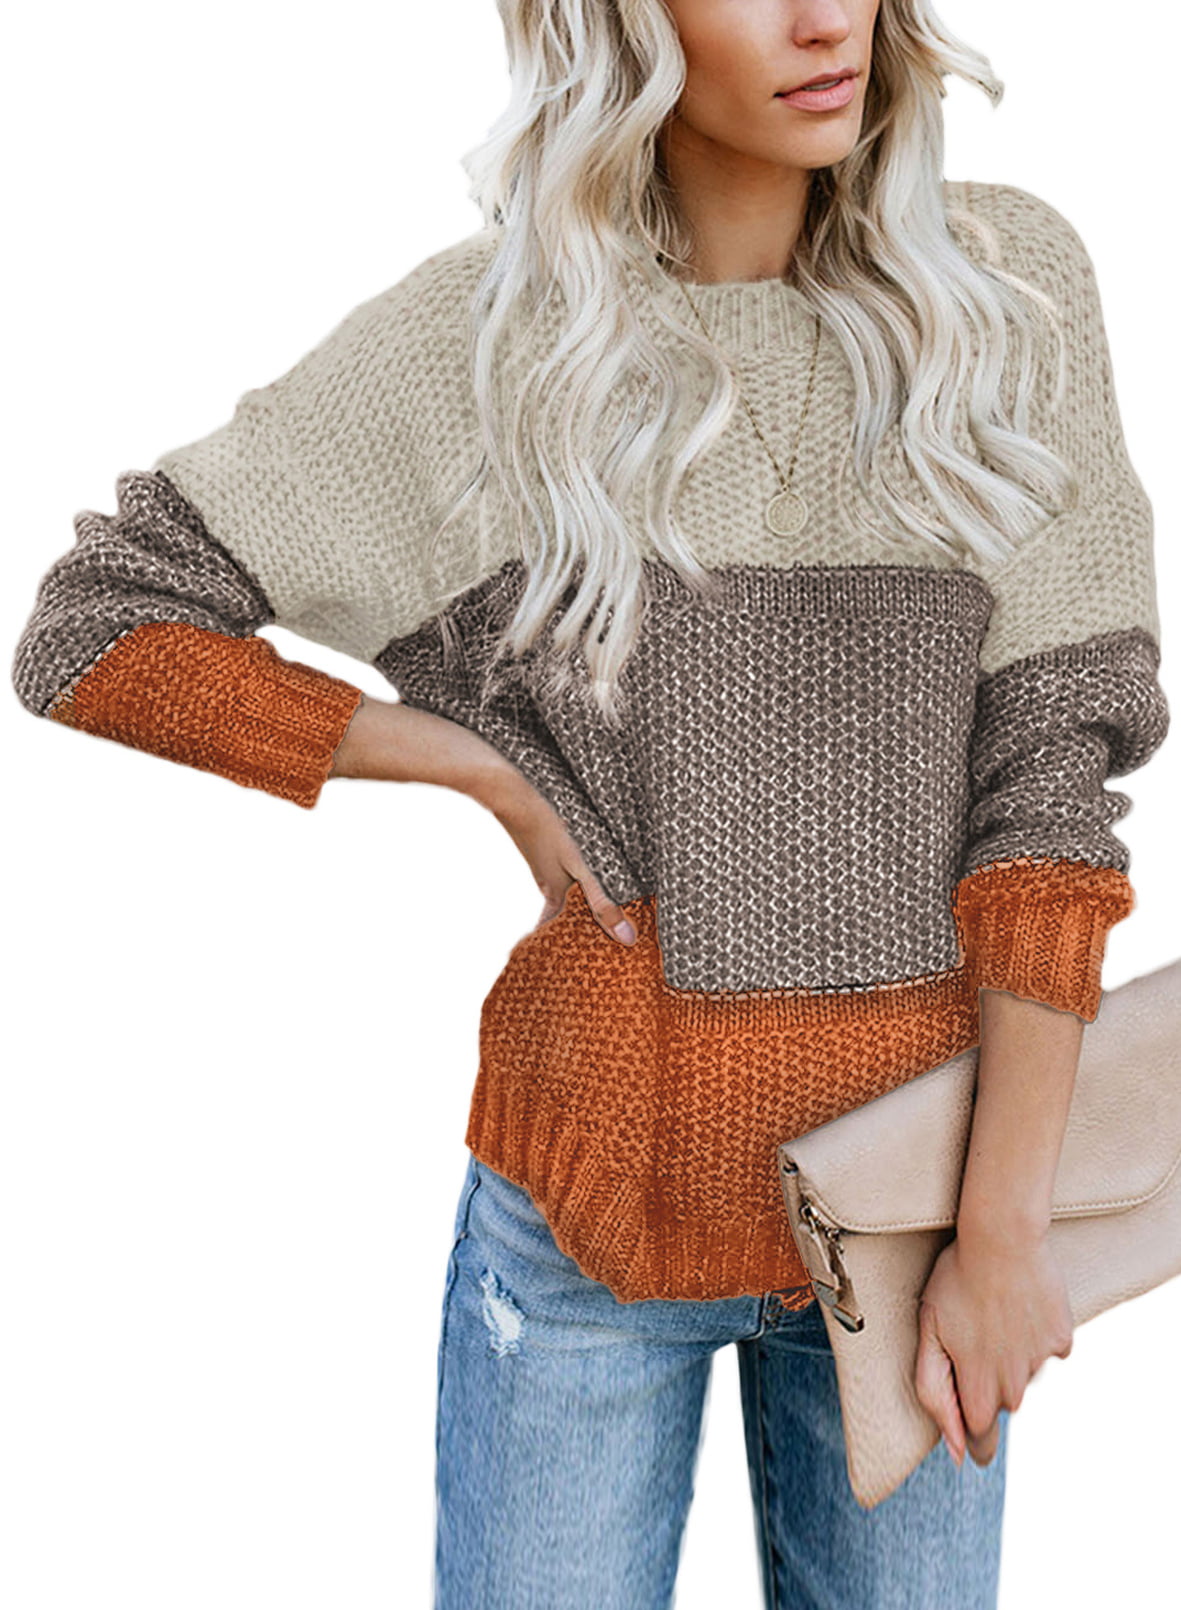 Ribtorsp Womens Color Block Sweater Knit Jumper Oversized Sweaters Crew Neck Long Sleeve Pullover Tops